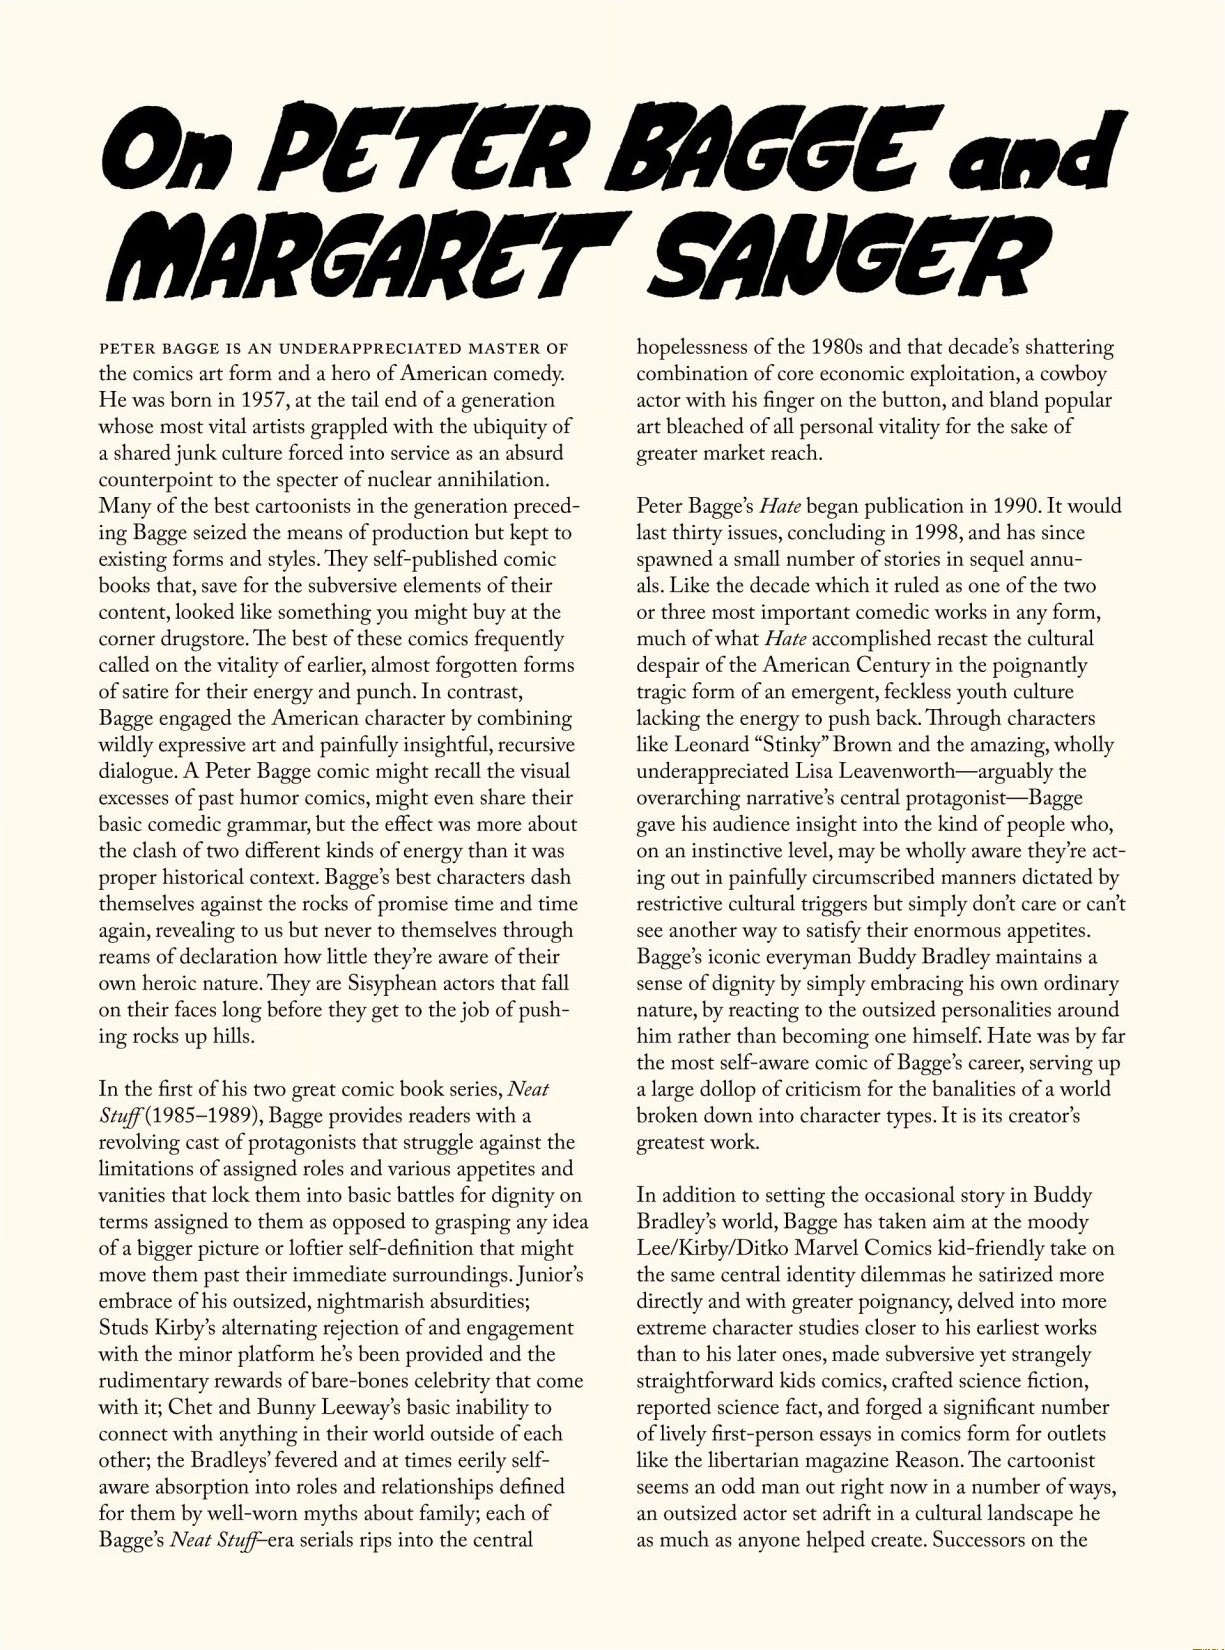 Read online Woman Rebel: The Margaret Sanger Story comic -  Issue # TPB - 5